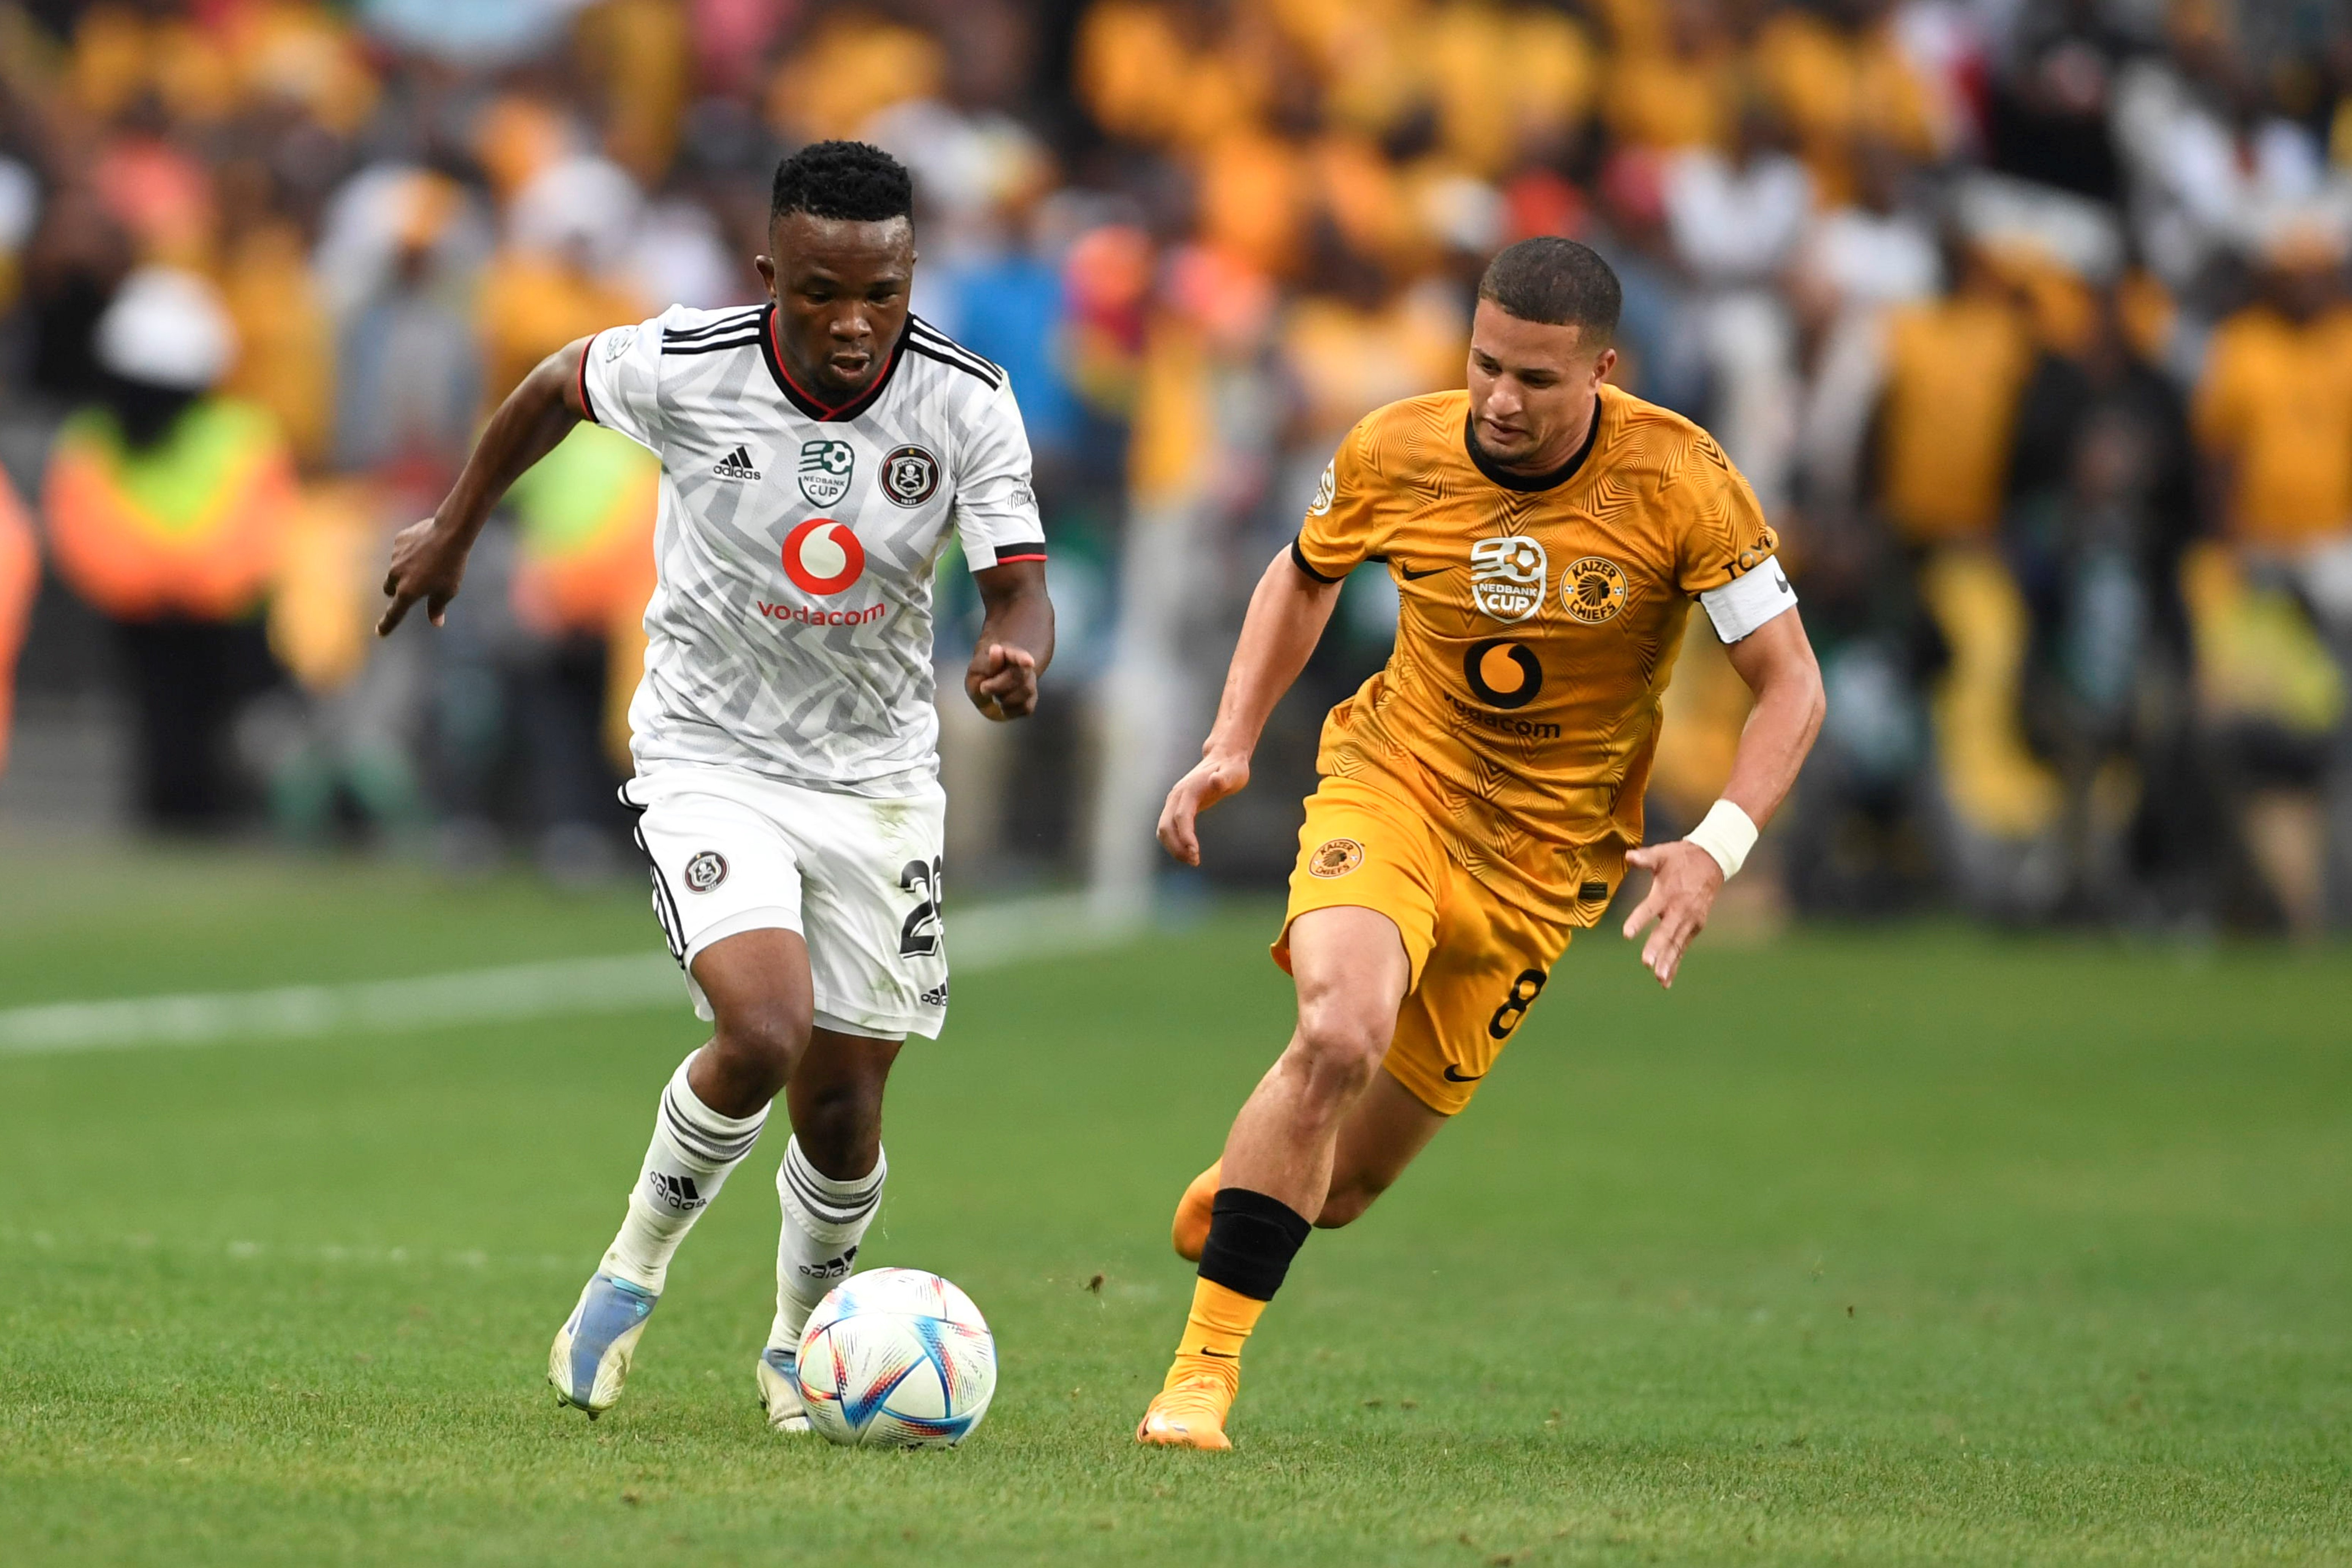 Terrence Dvzukamanja's late goal sees Pirates complete cup double